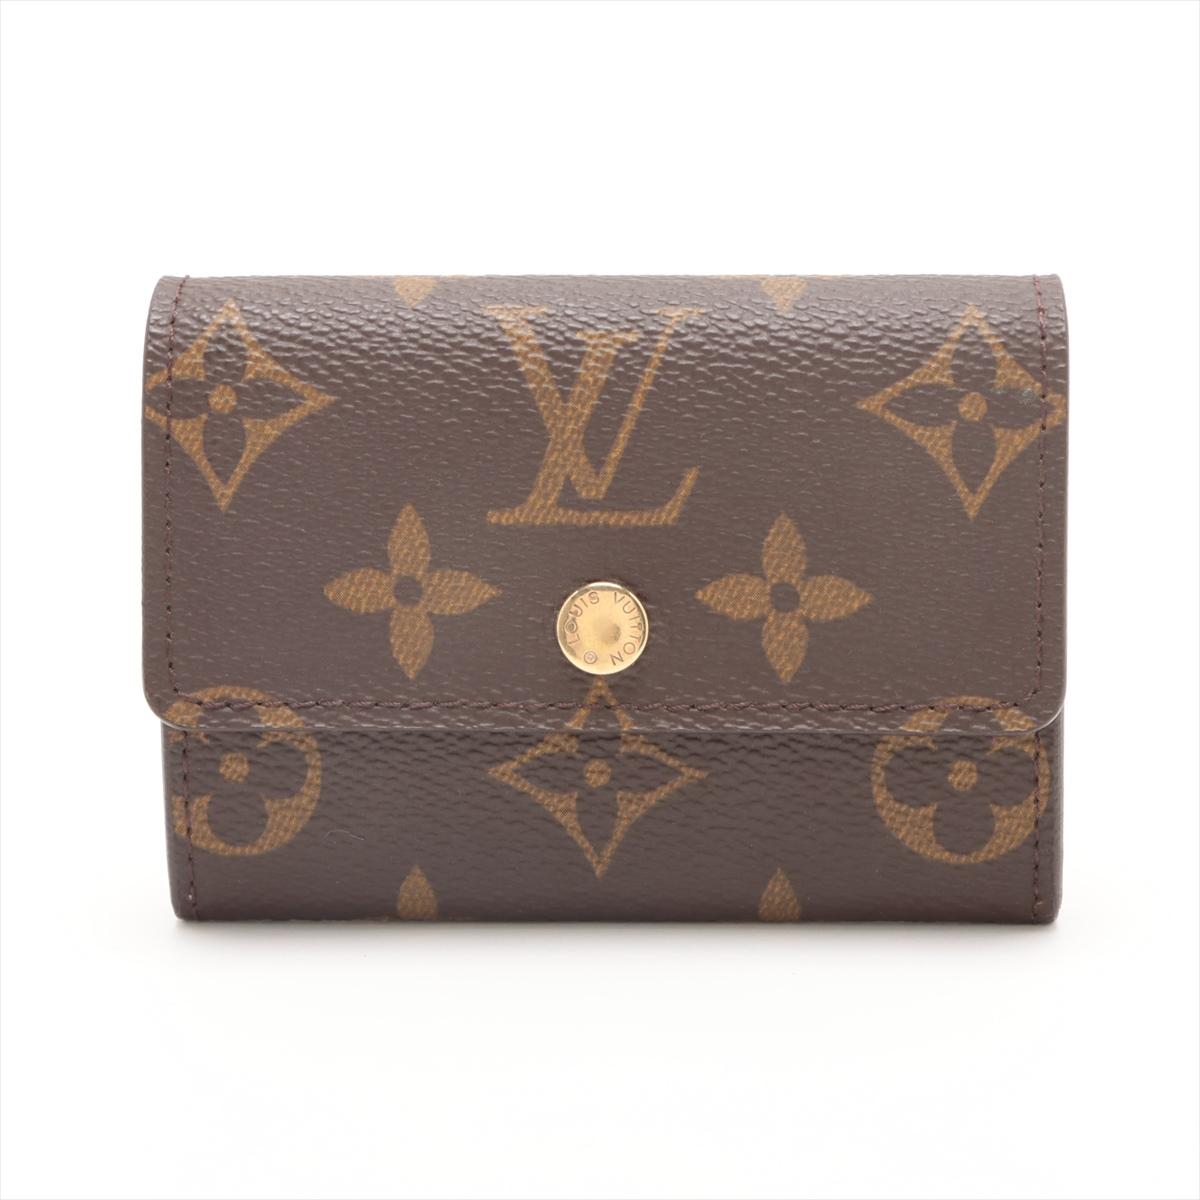 The Louis Vuitton Monogram Plat Coin Purse a chic and compact accessory that seamlessly combines classic style with practical functionality. Meticulously crafted by Louis Vuitton, the coin purse features the iconic Monogram canvas, showcasing the